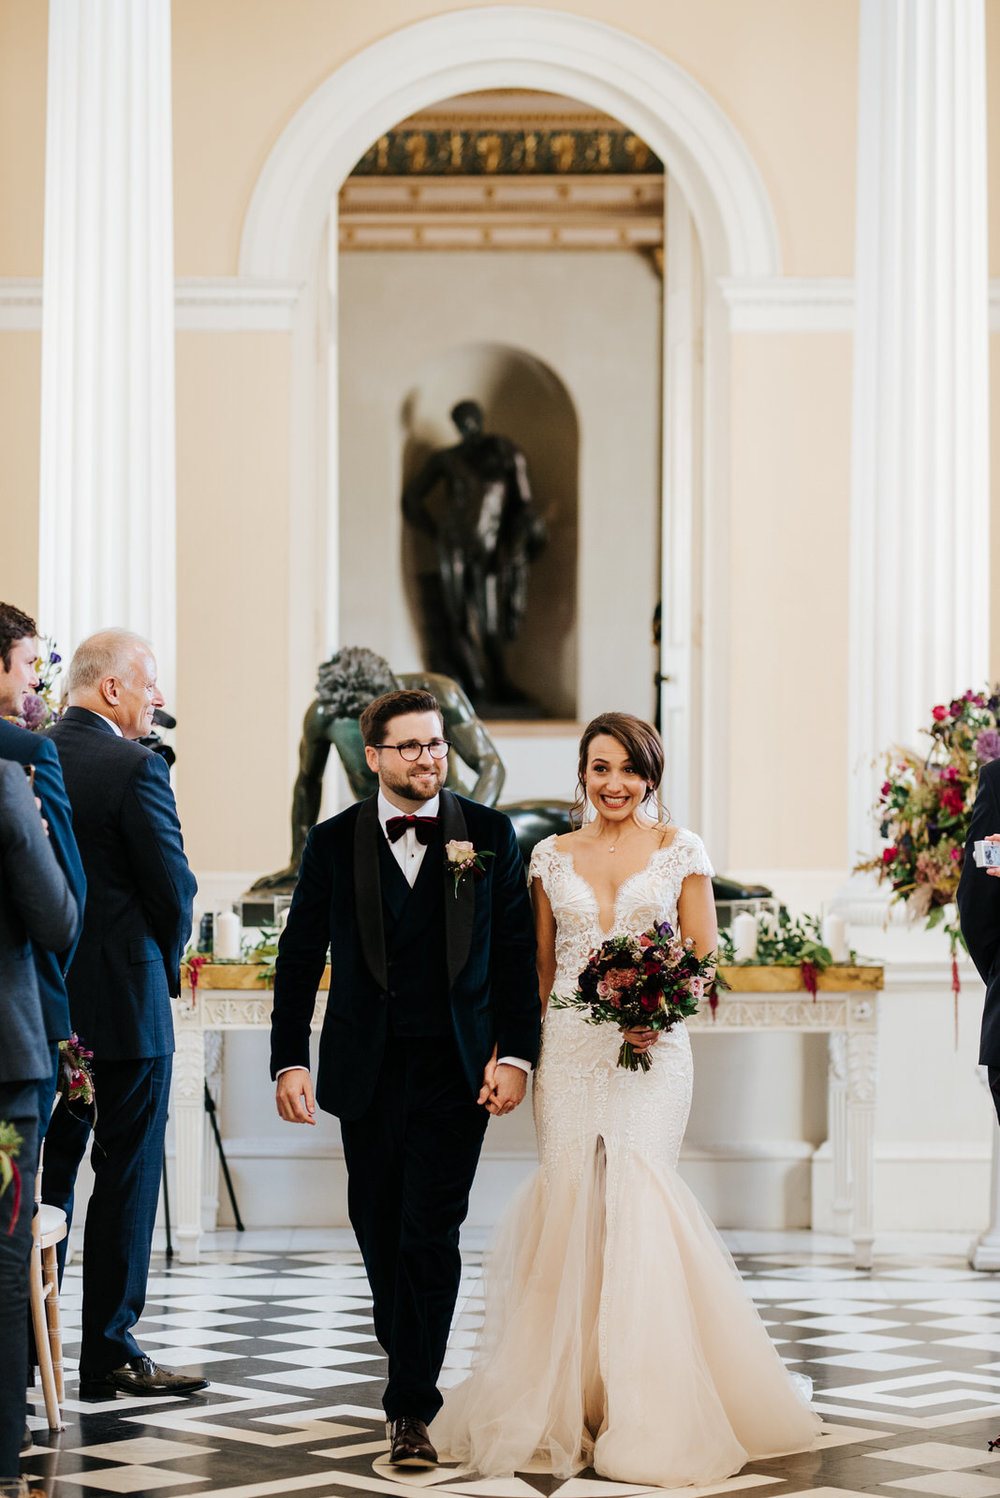 Bride and groom exit down aisle as a married couple